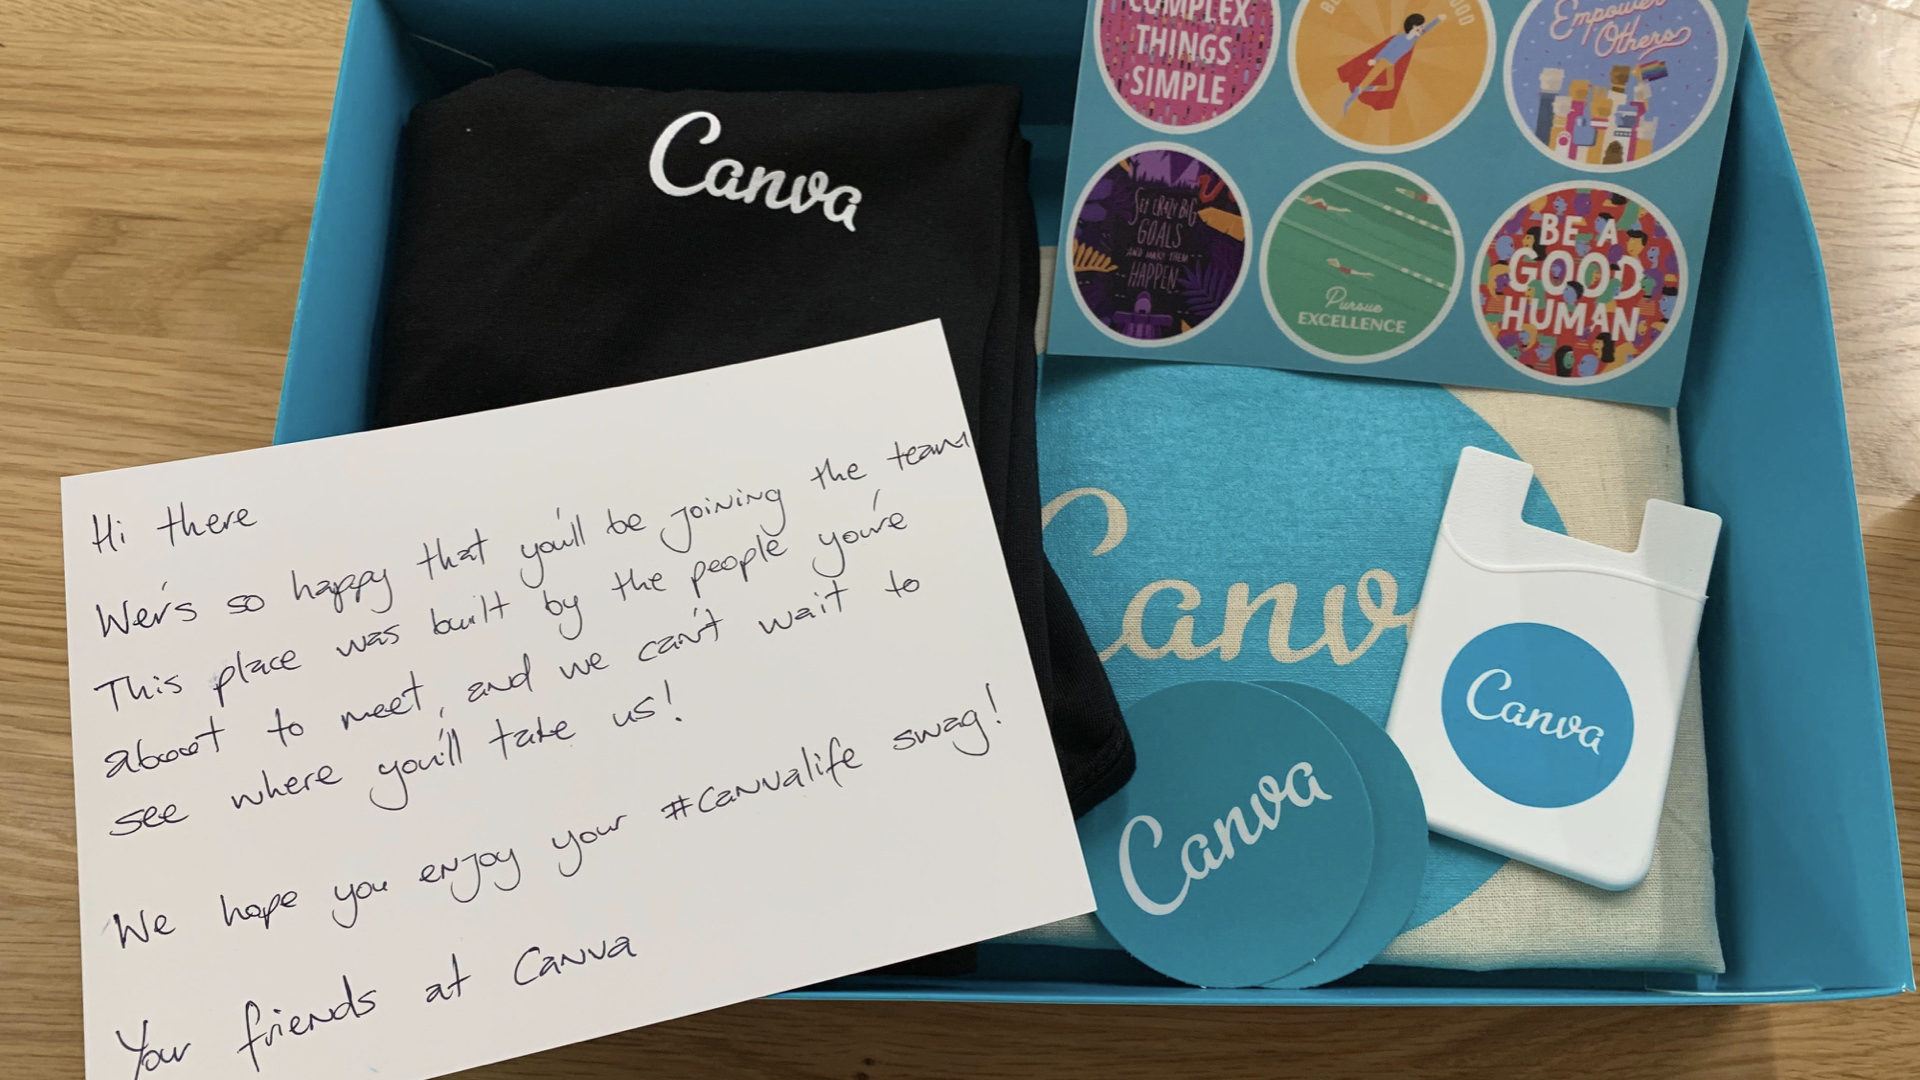 The box of swag and a personalized note that new hires receive in the mail after accepting the offer.